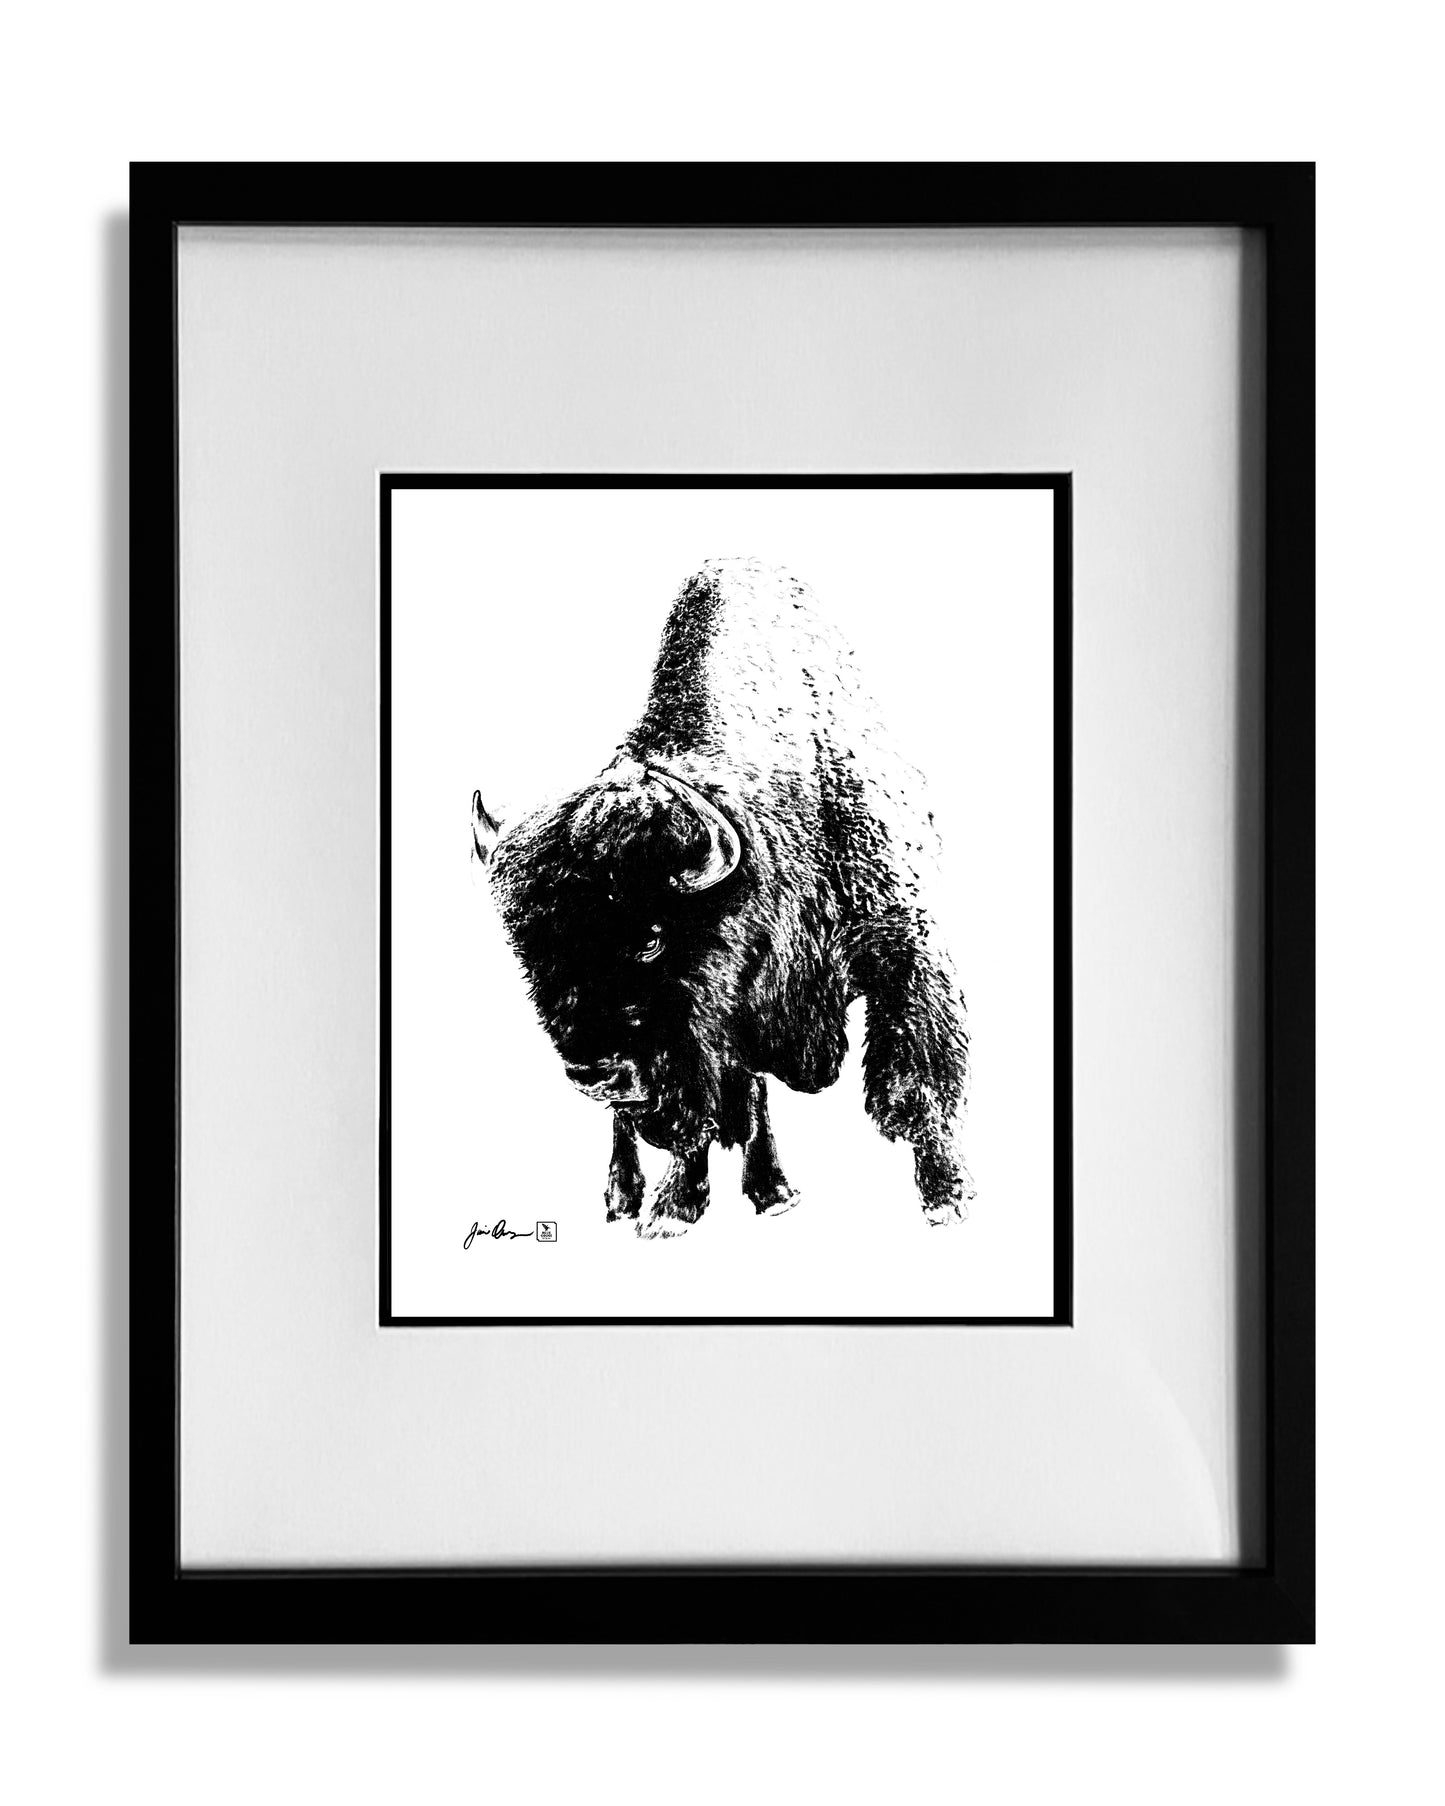 Leaning Buffalo print framed and matted